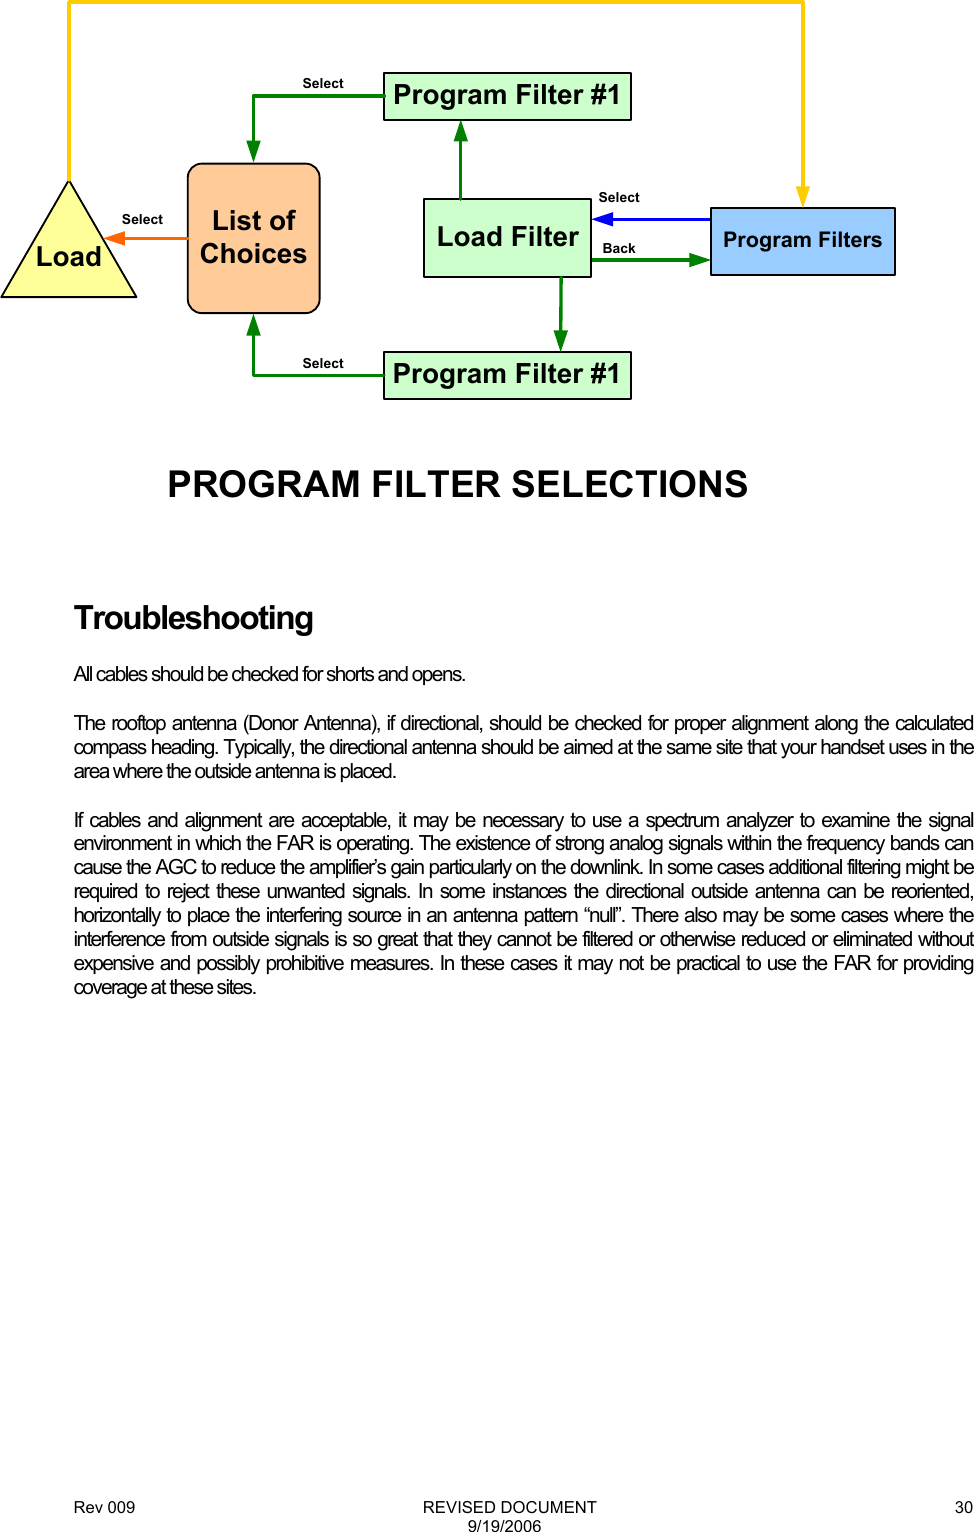 Rev 009                                                              REVISED DOCUMENT 9/19/2006 30PROGRAM FILTER SELECTIONSLoad FilterSelectBack Program FiltersProgram Filter #1Program Filter #1List of ChoicesLoadSelectSelectSelect  Troubleshooting All cables should be checked for shorts and opens. The rooftop antenna (Donor Antenna), if directional, should be checked for proper alignment along the calculated compass heading. Typically, the directional antenna should be aimed at the same site that your handset uses in the area where the outside antenna is placed. If cables and alignment are acceptable, it may be necessary to use a spectrum analyzer to examine the signal environment in which the FAR is operating. The existence of strong analog signals within the frequency bands can cause the AGC to reduce the amplifier’s gain particularly on the downlink. In some cases additional filtering might be required to reject these unwanted signals. In some instances the directional outside antenna can be reoriented, horizontally to place the interfering source in an antenna pattern “null”. There also may be some cases where the interference from outside signals is so great that they cannot be filtered or otherwise reduced or eliminated without expensive and possibly prohibitive measures. In these cases it may not be practical to use the FAR for providing coverage at these sites.            